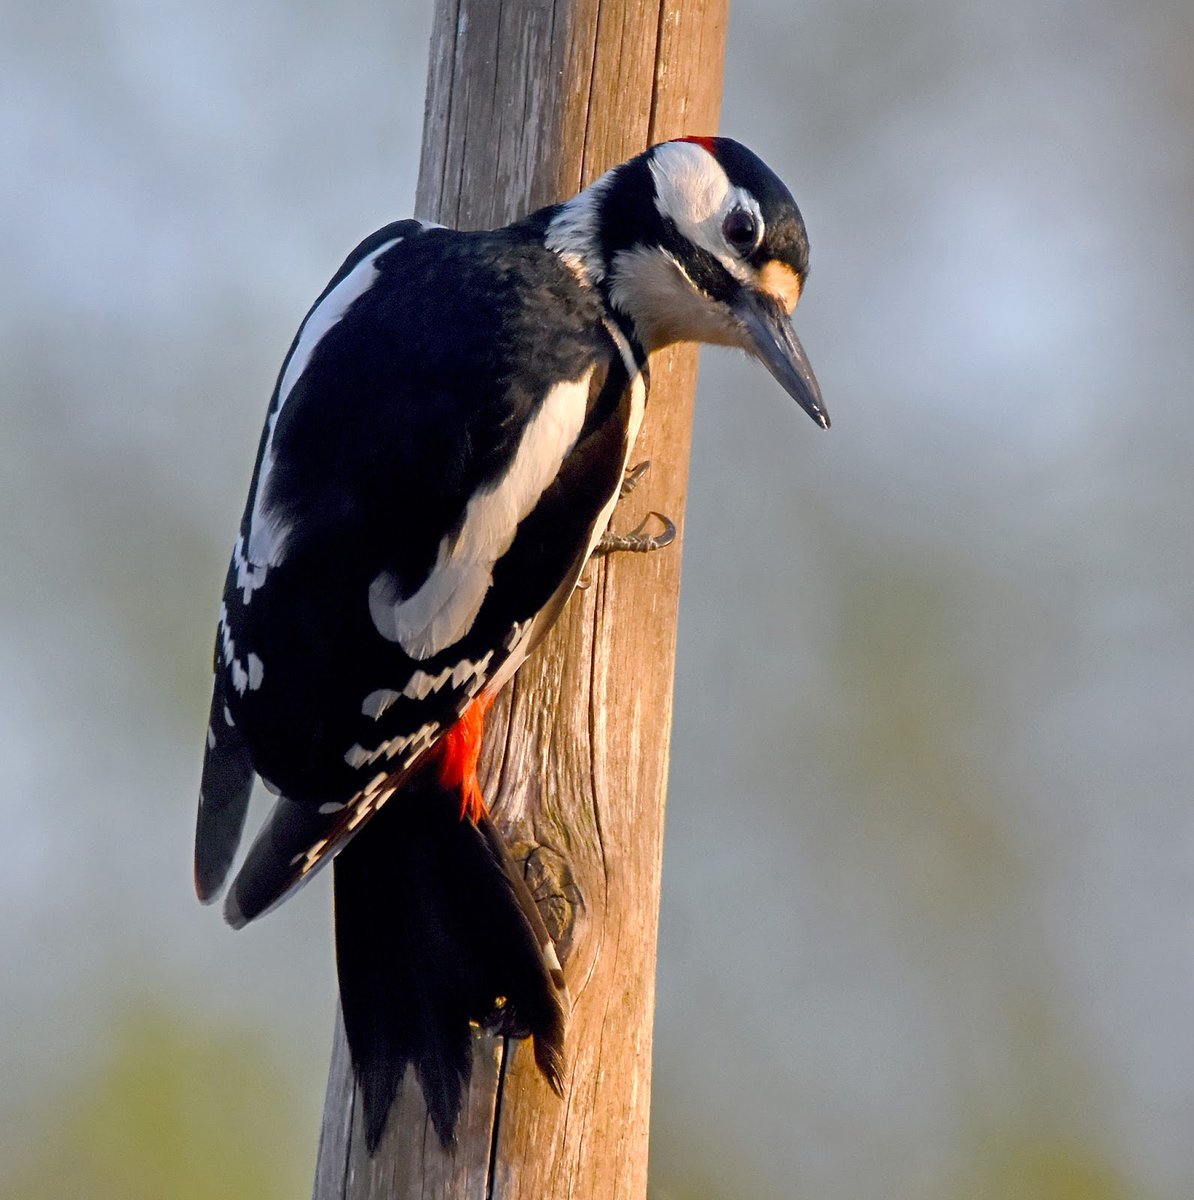 Great Spotted Woodpecker A beautiful visitor to gardens with trees in, or close by. Often seen clinging to trunks and branches, they like peanut feeders and love seed & fat mixes.Quite nervous & flighty, they're black & white with flashes of red. #SelfIsolationBirdWatch 